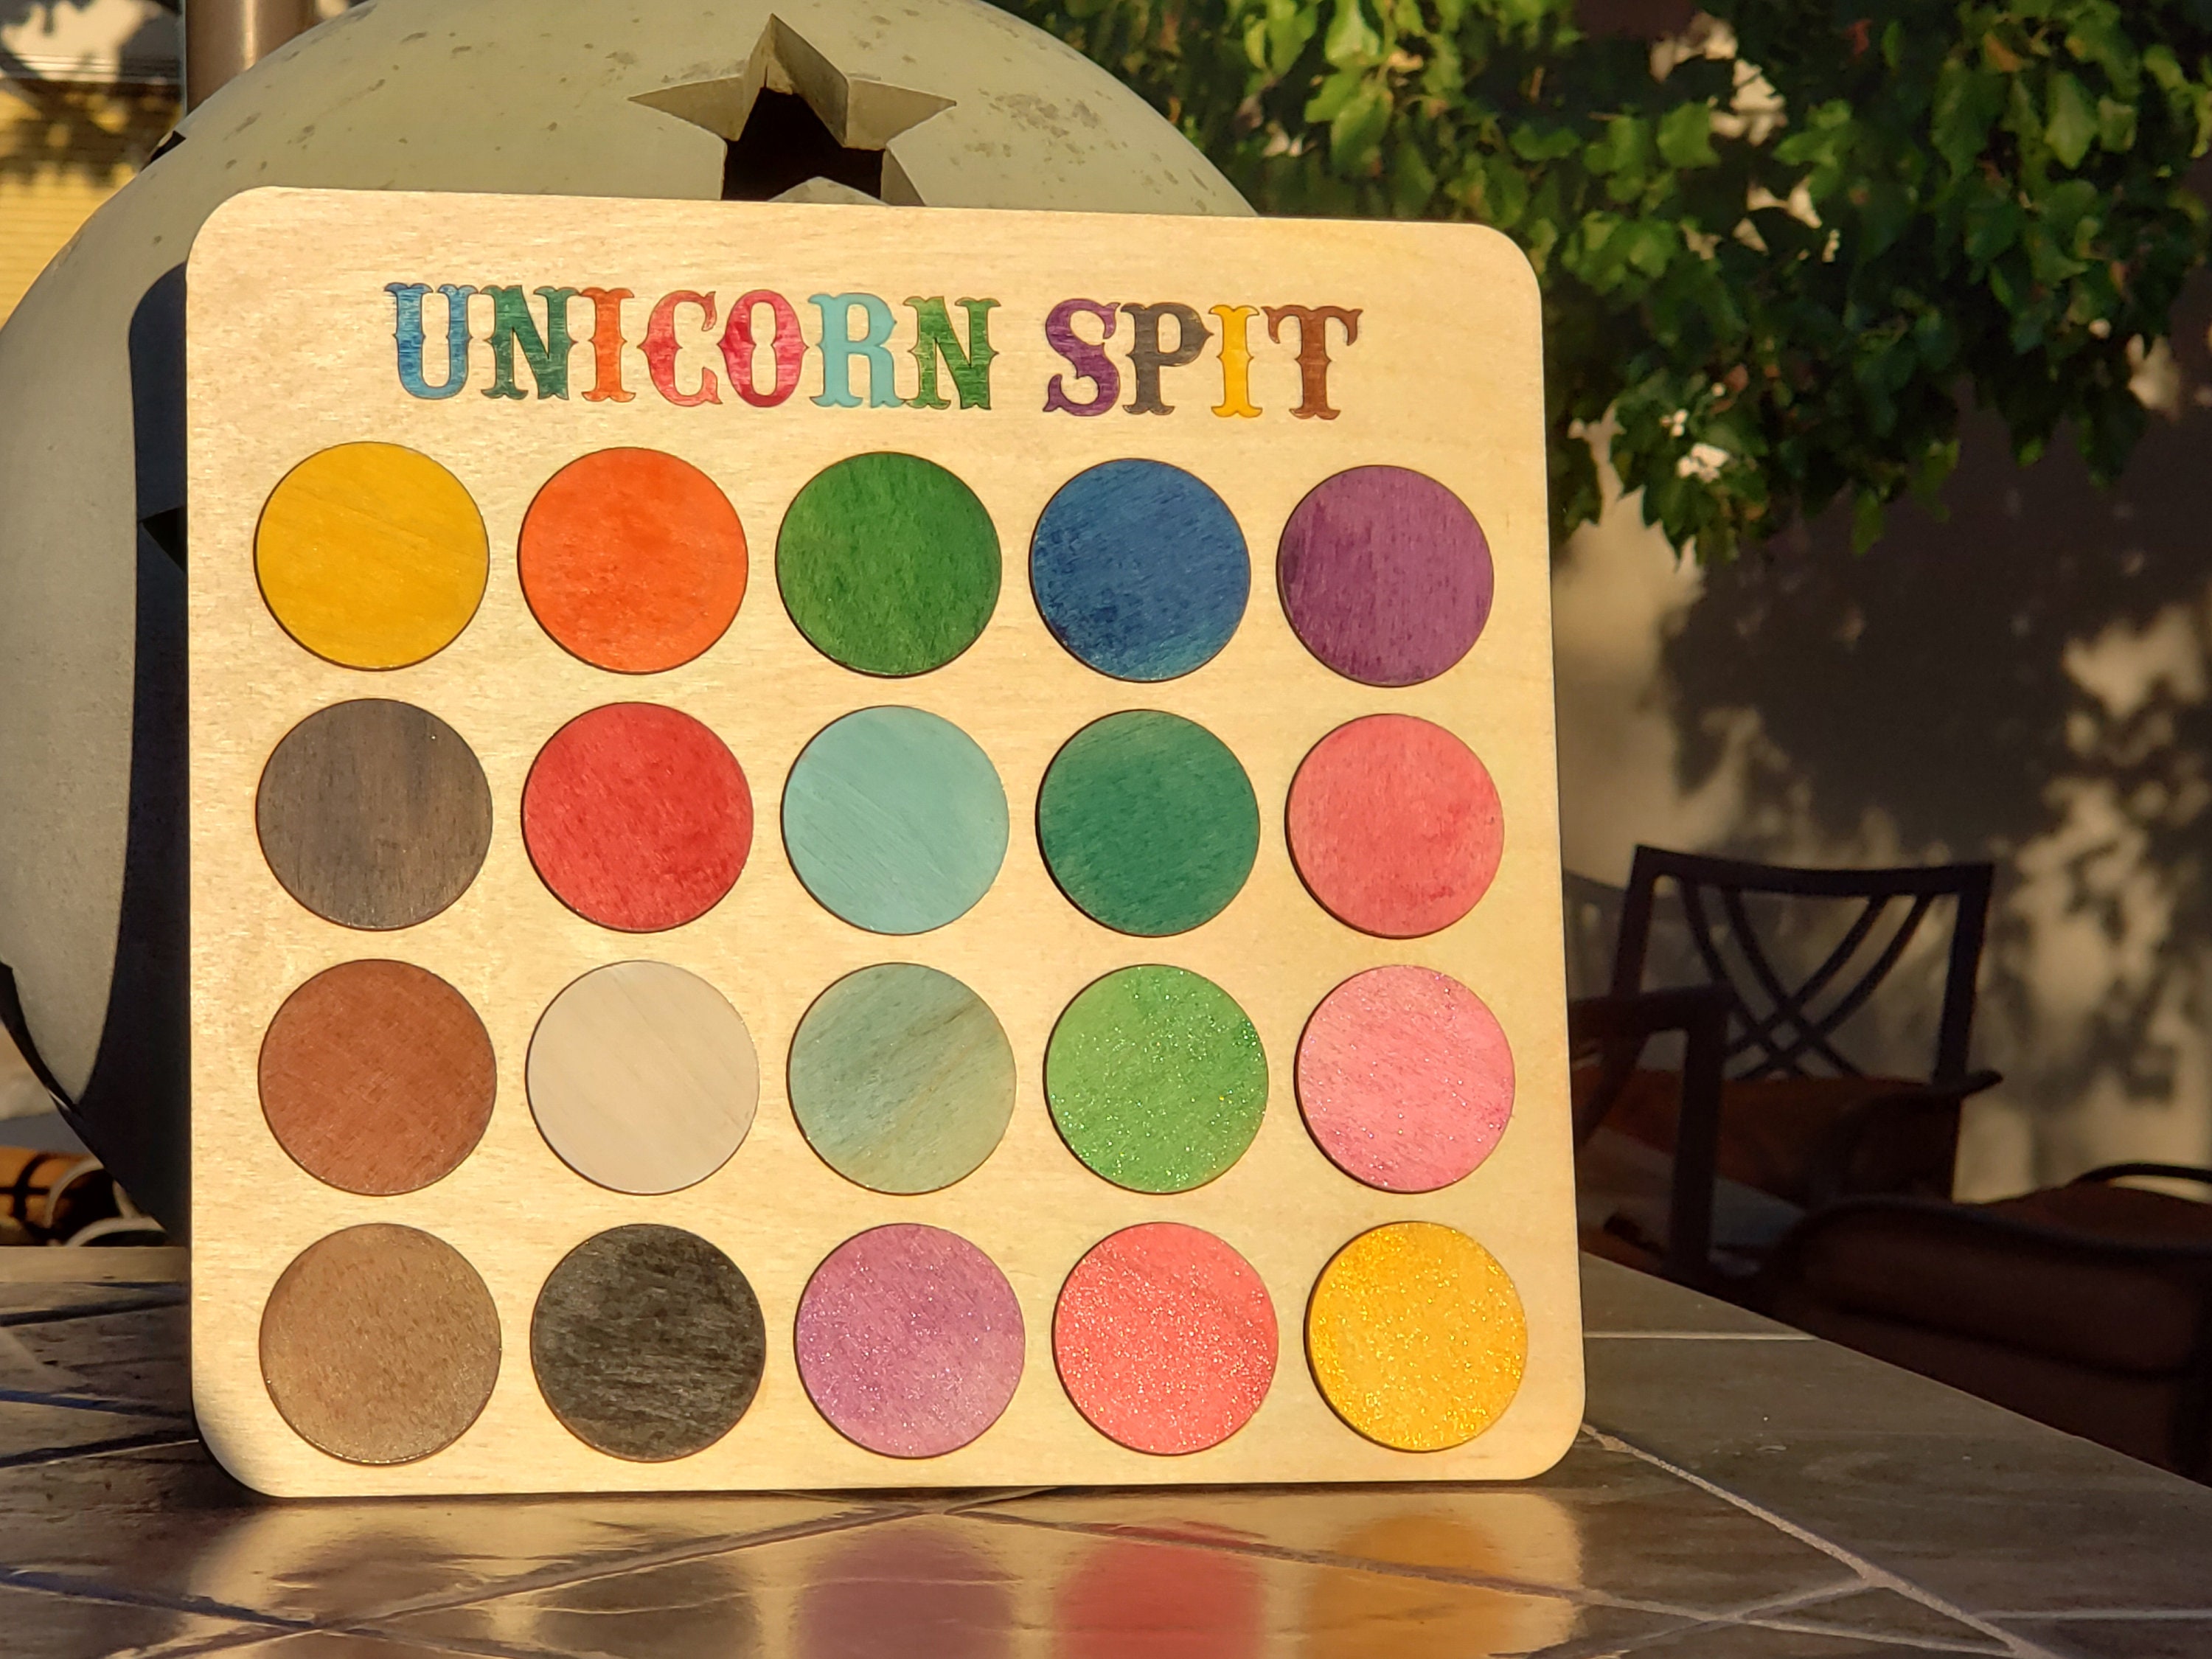 Unicorn Spit Concentrated Gel Stain and Glaze 4.0oz Fall